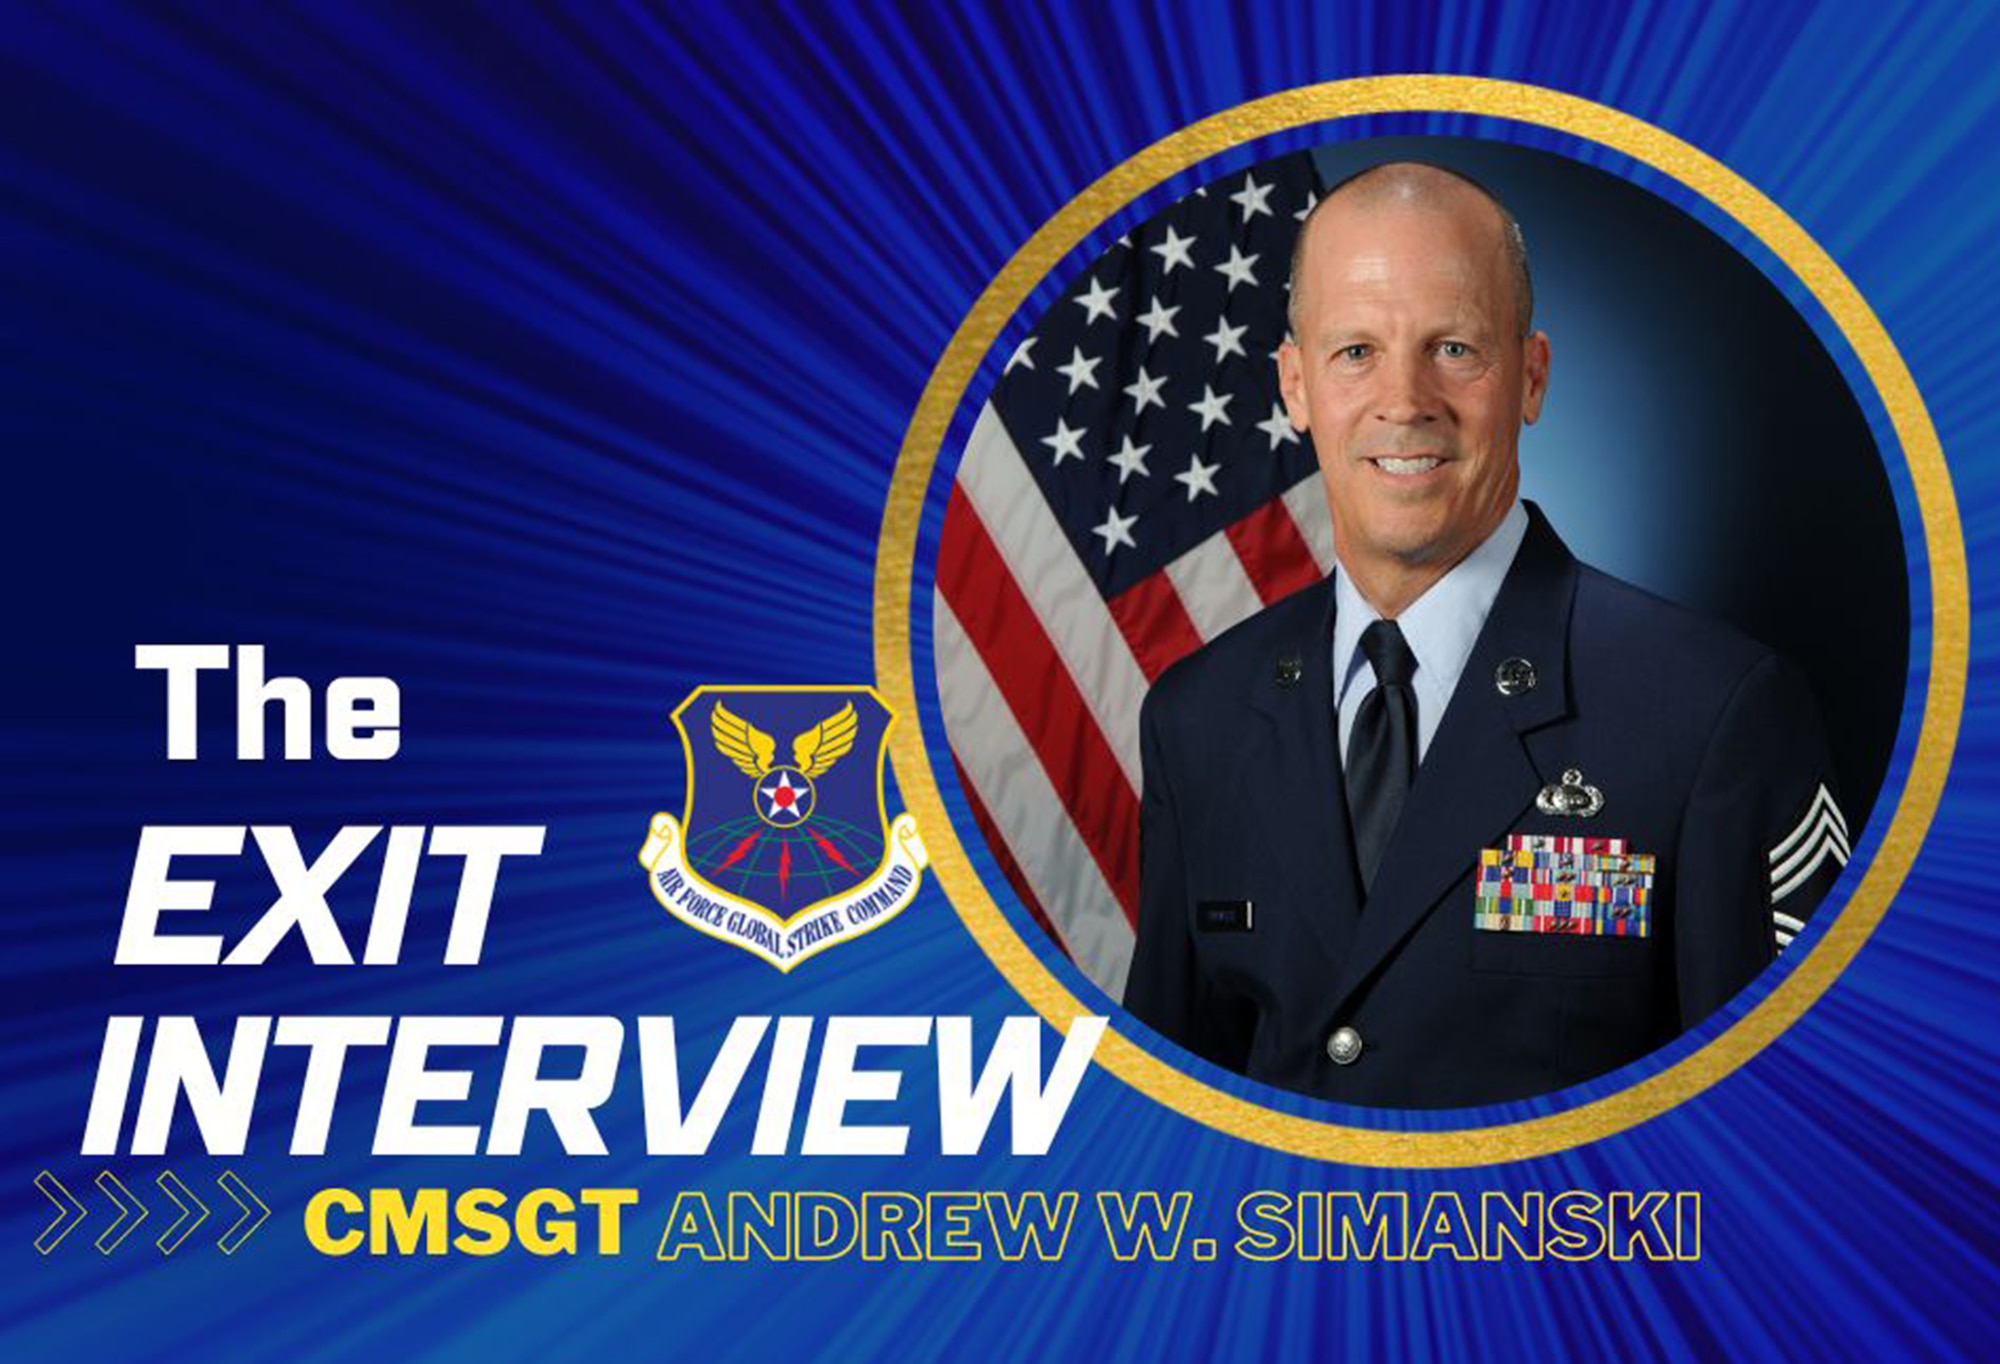 A graphic featuring the official portrait of CMSgt Simanski